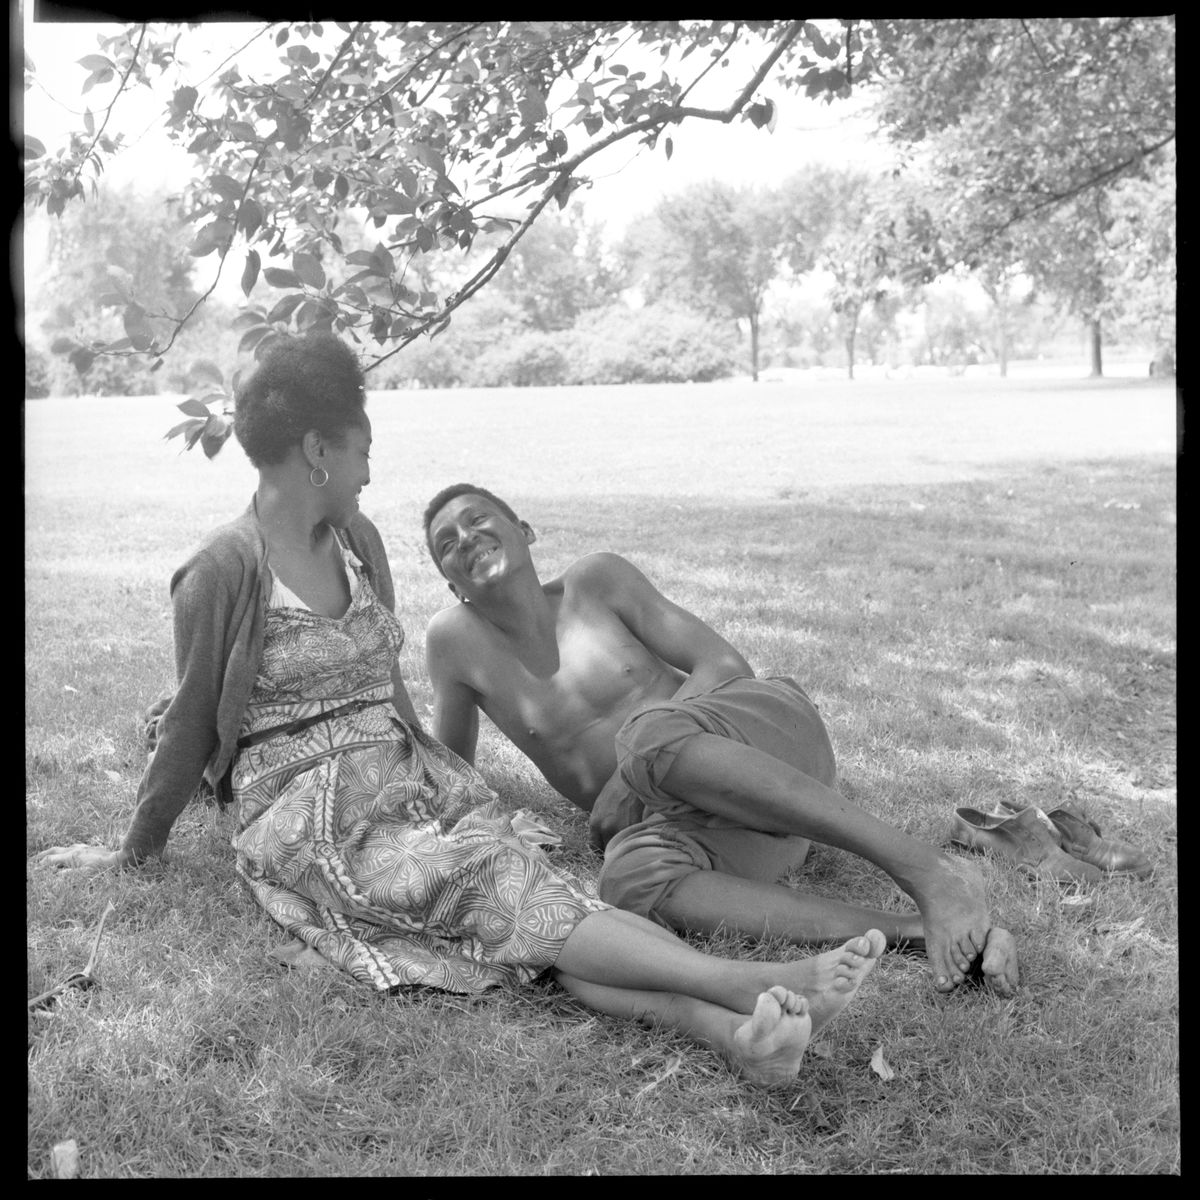 Woman and man seated on grass near trees by Toni Frissell - c.1955